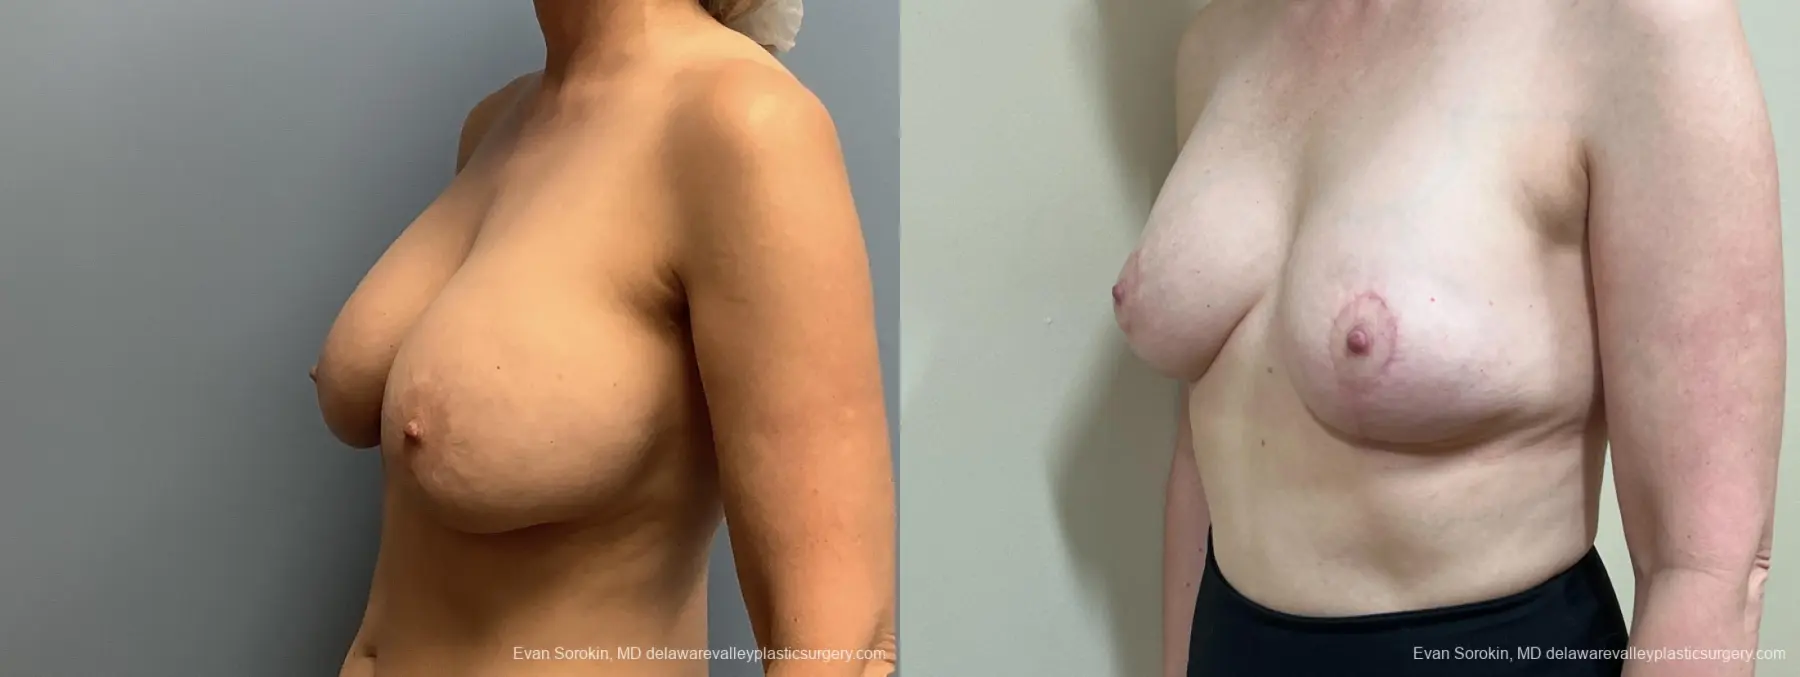 Breast Reduction: Patient 9 - Before and After 4